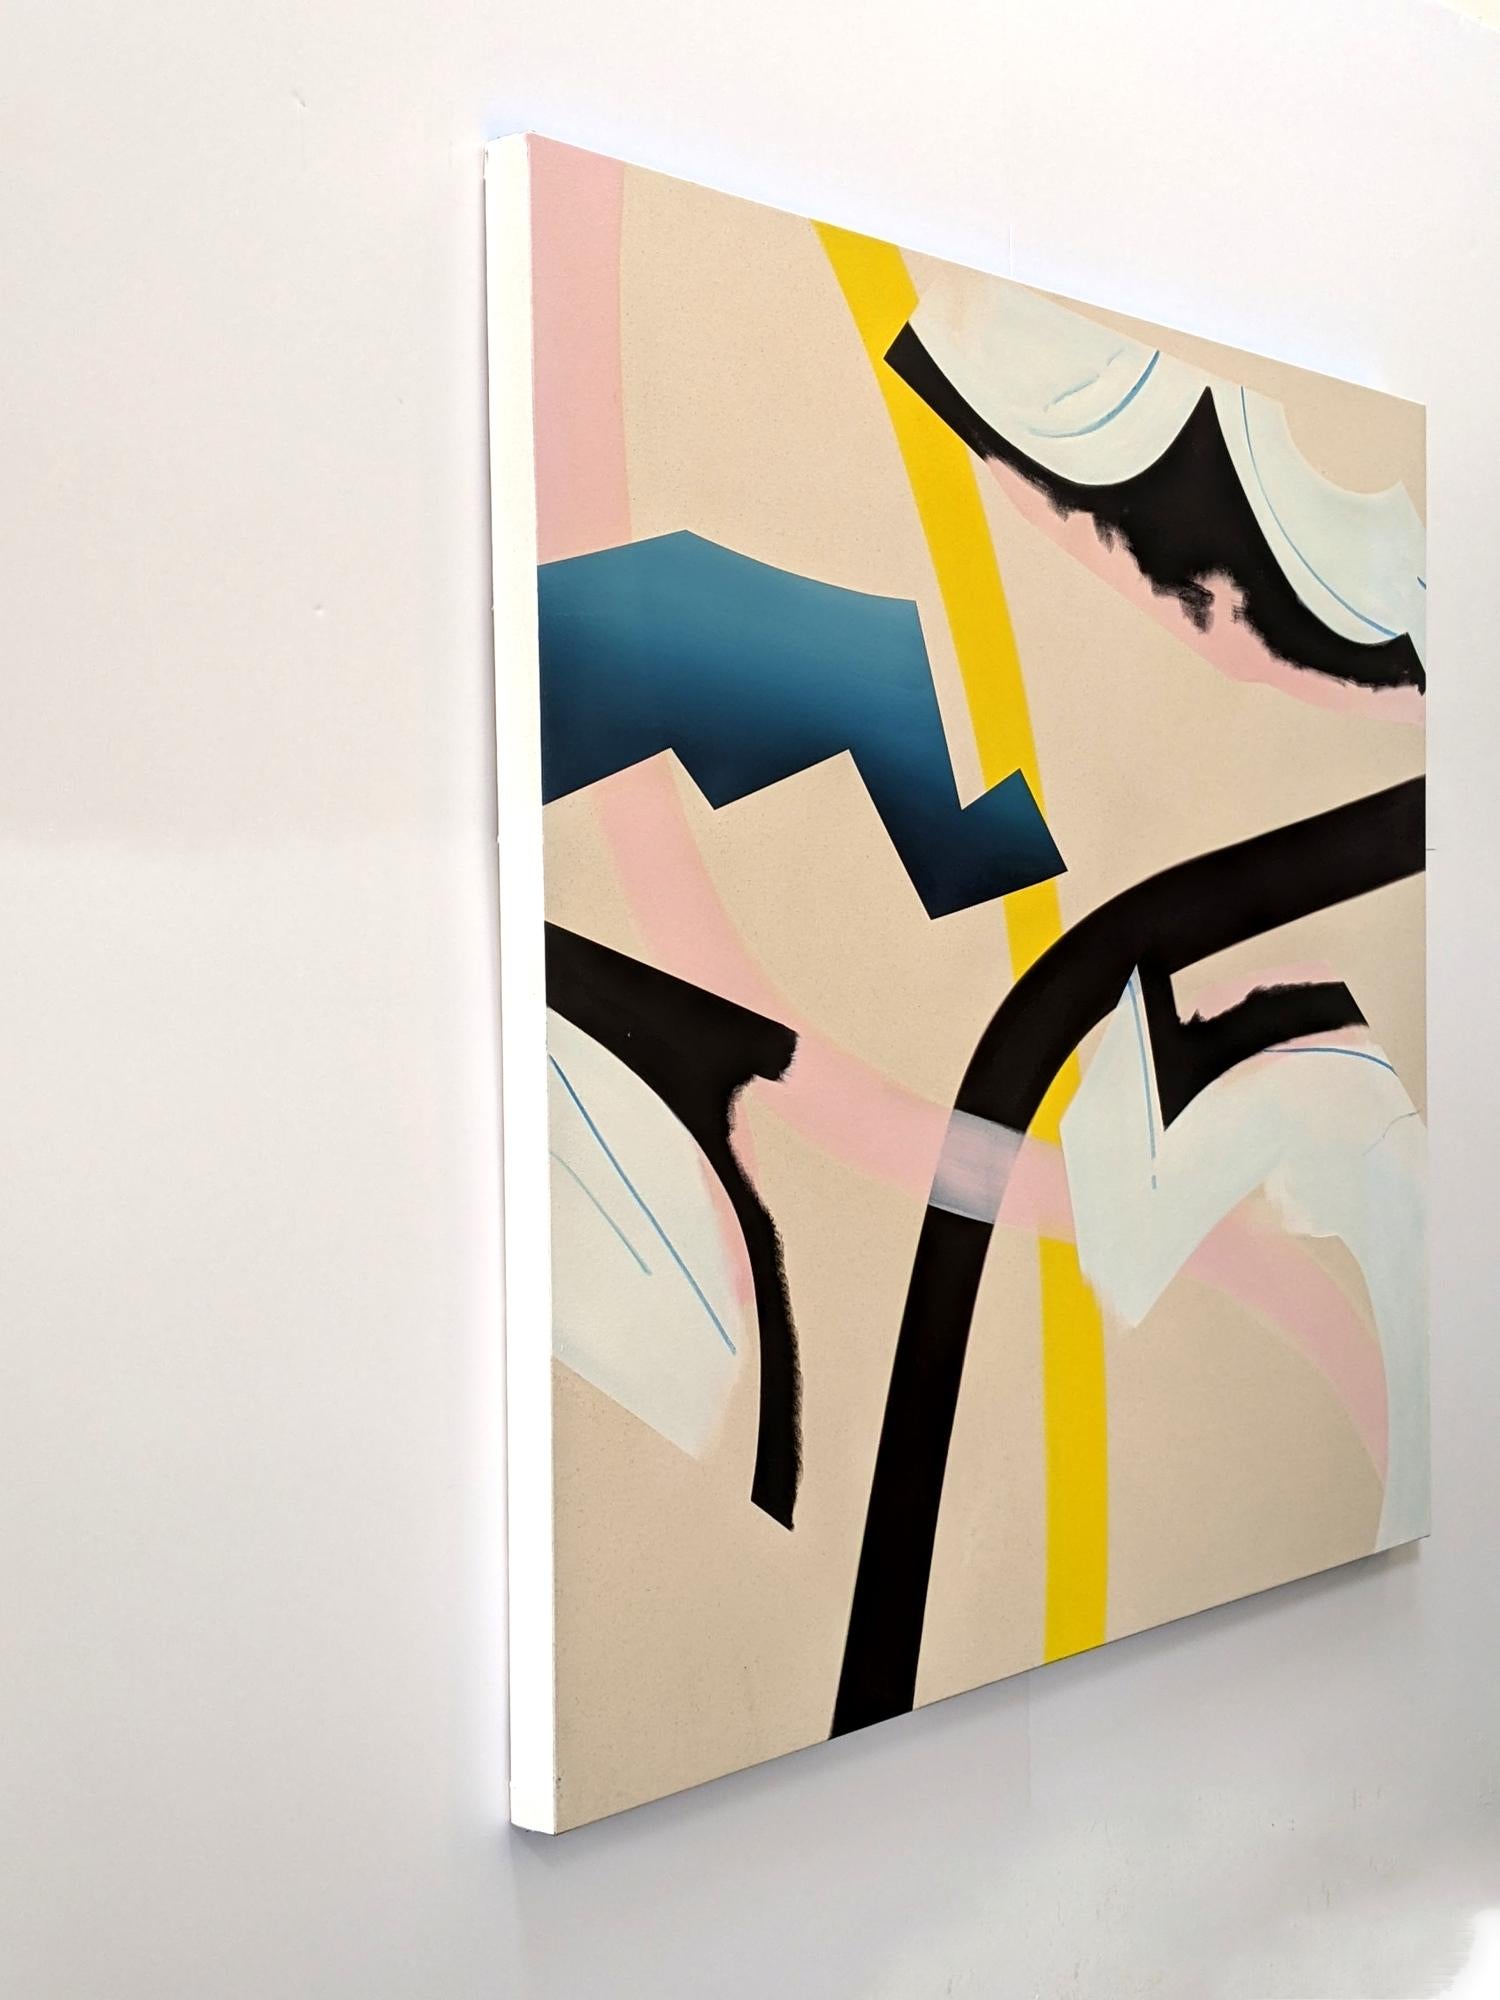 In this lyrical abstract work by Montreal born Mel Davis organic shapes intersect in a playful composition. Using form and colour--blue, yellow, blush pink, black and snow-white Davis re-imagines the traditional landscape. 

